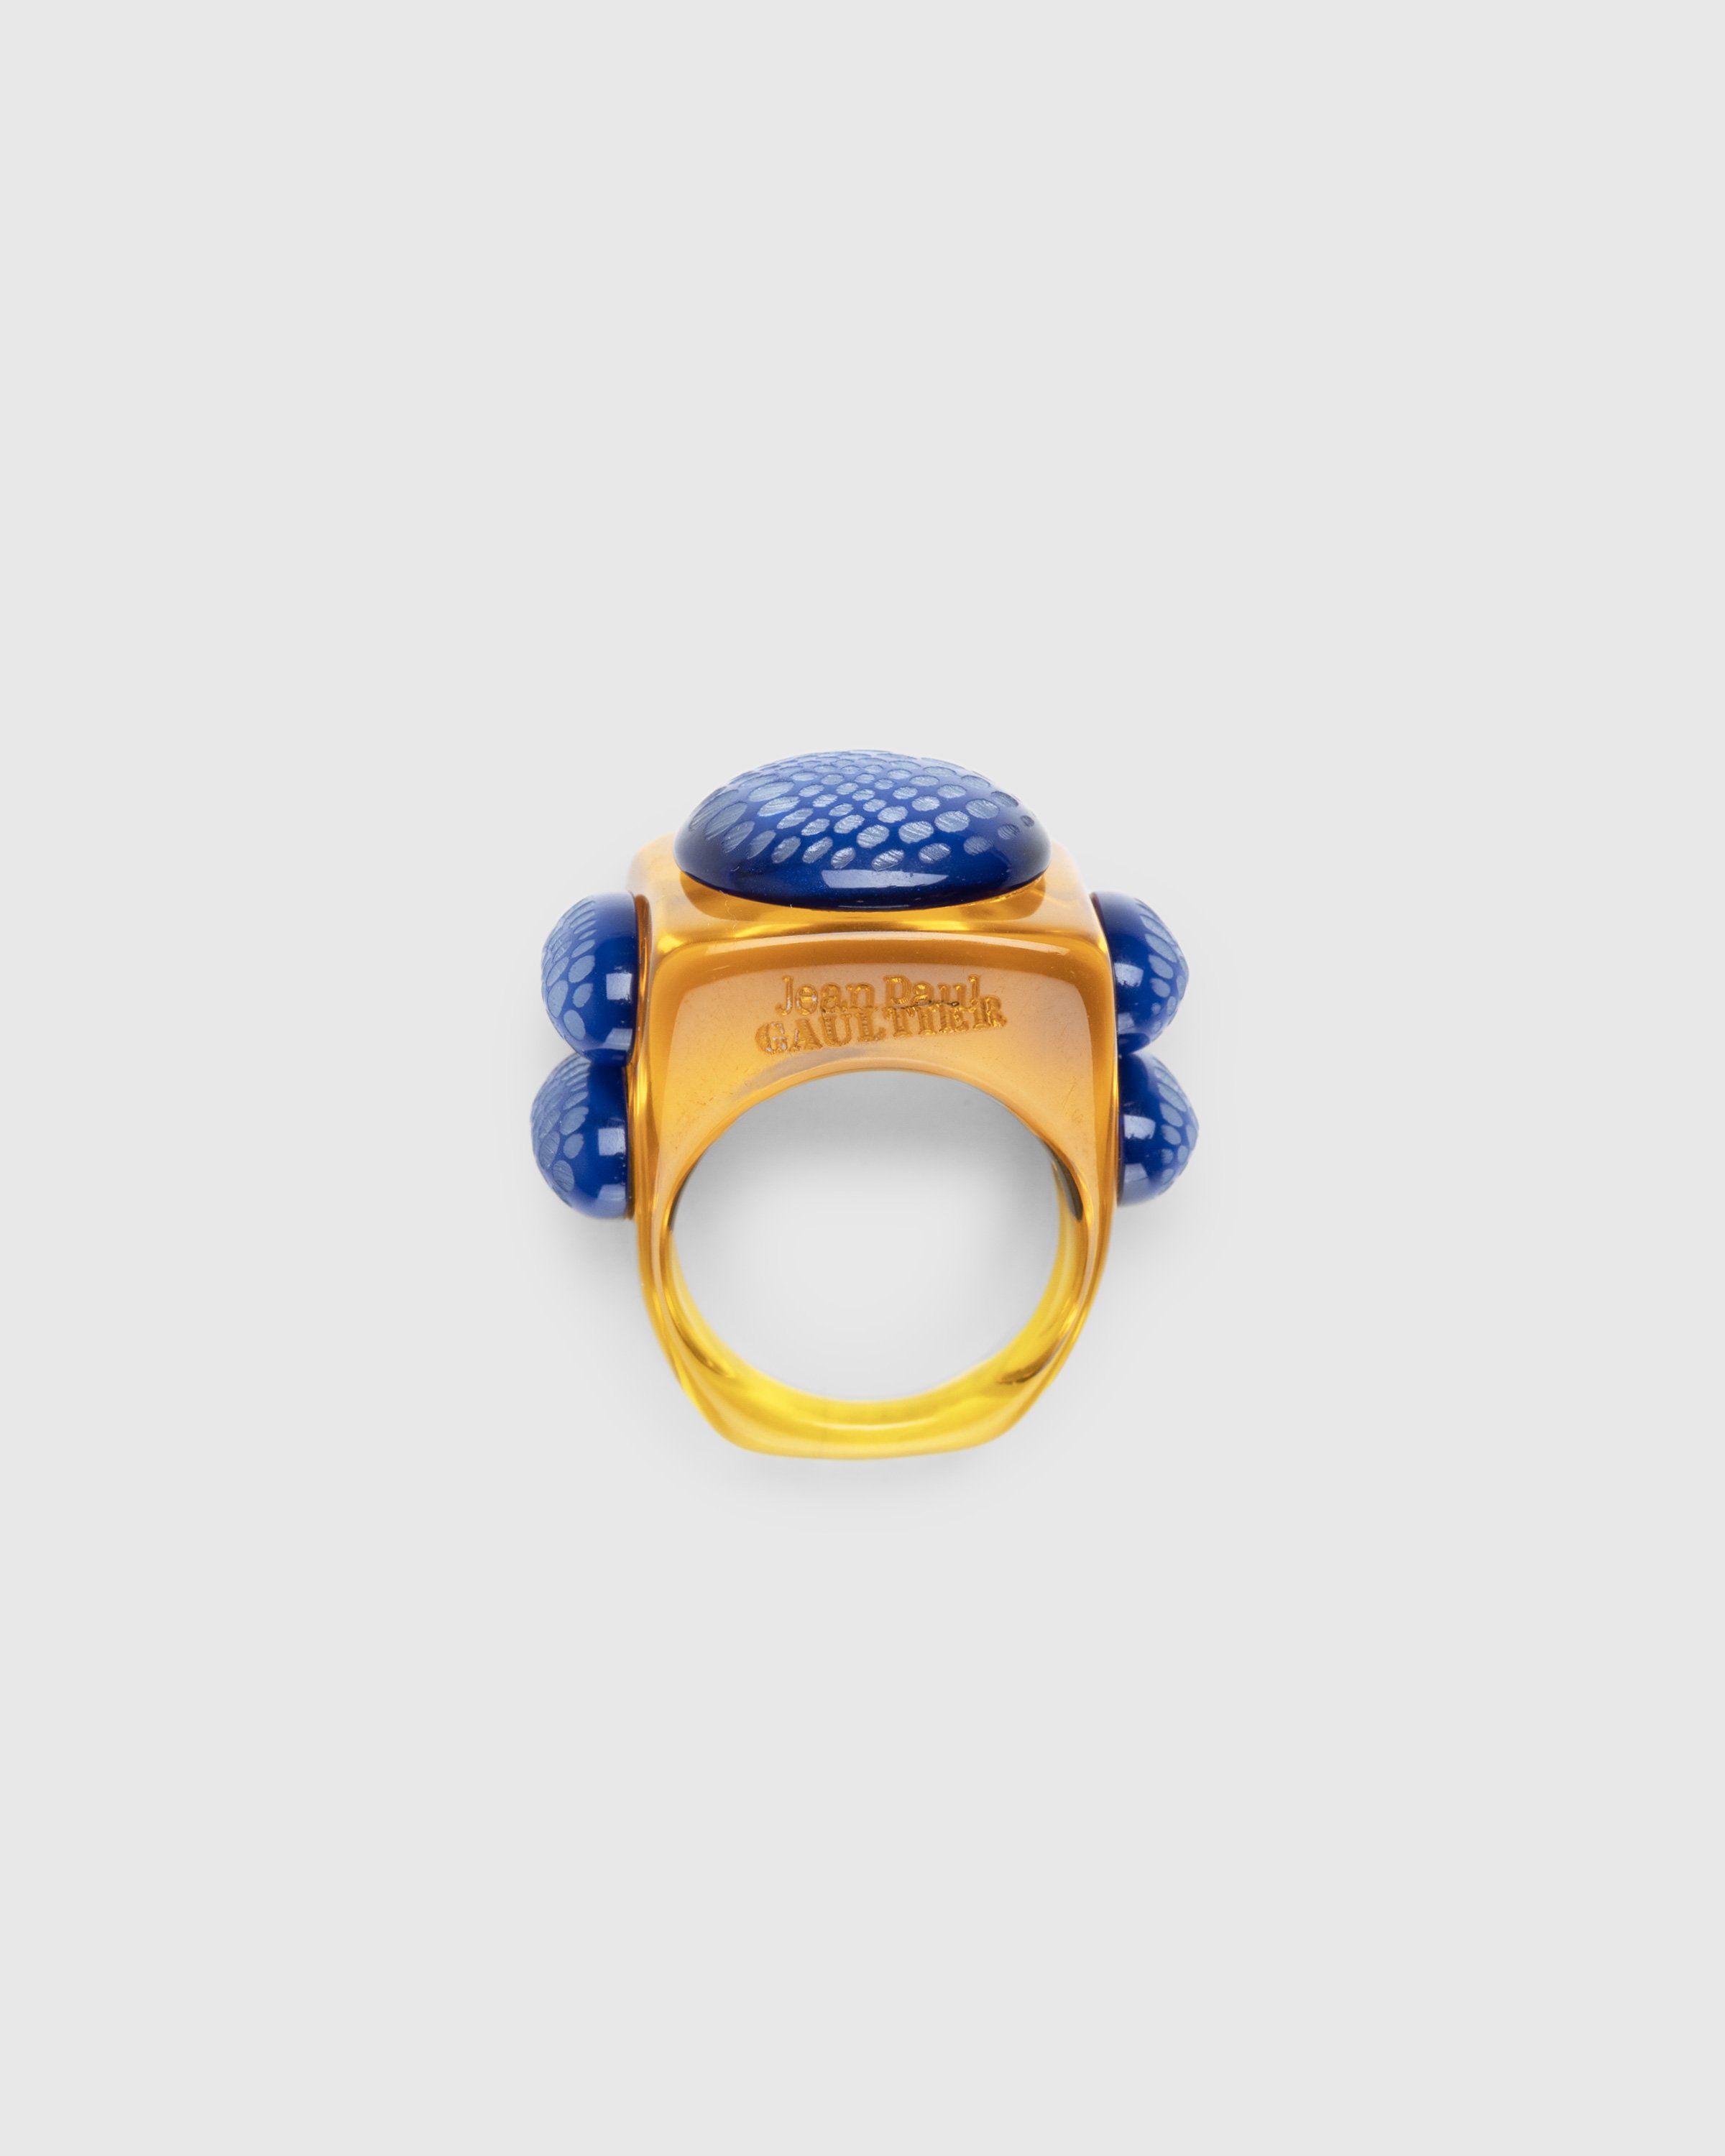 Jean Paul Gaultier - Submarine Ring Amber/Perseo Blue - Accessories - Orange - Image 1